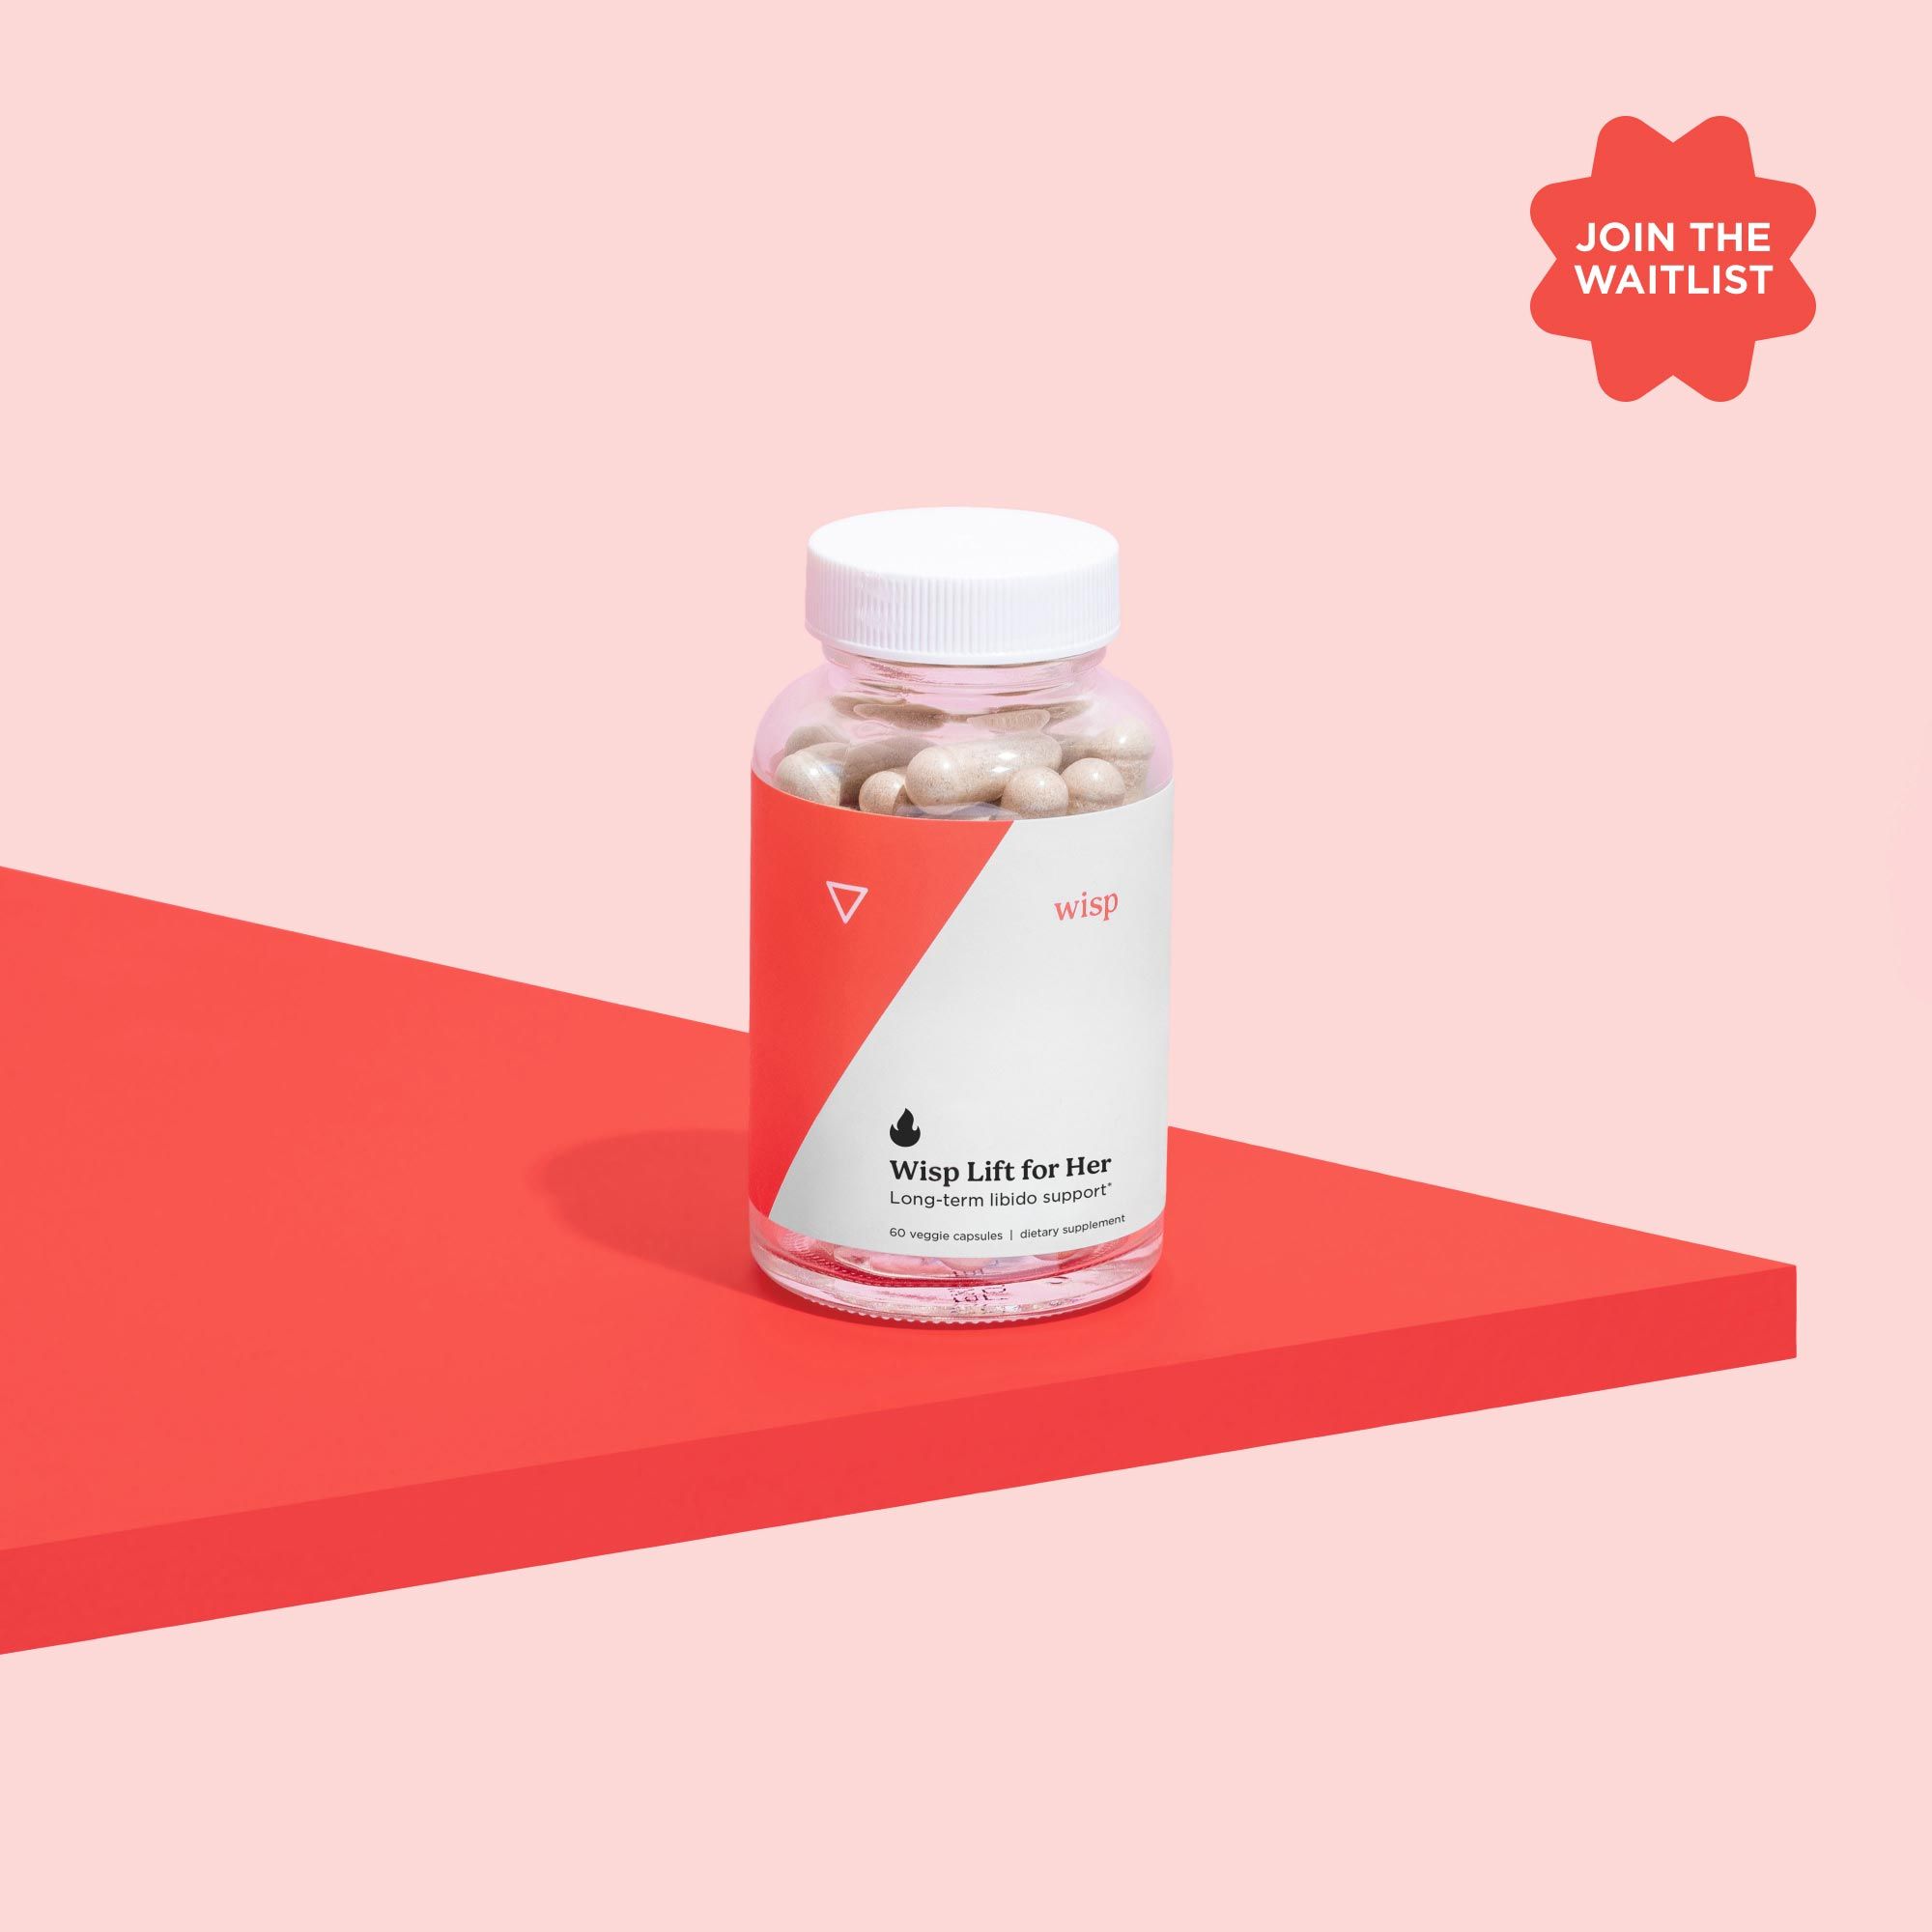 Wisp Lift Libido Supplements for Her on a red shelf with a pink background